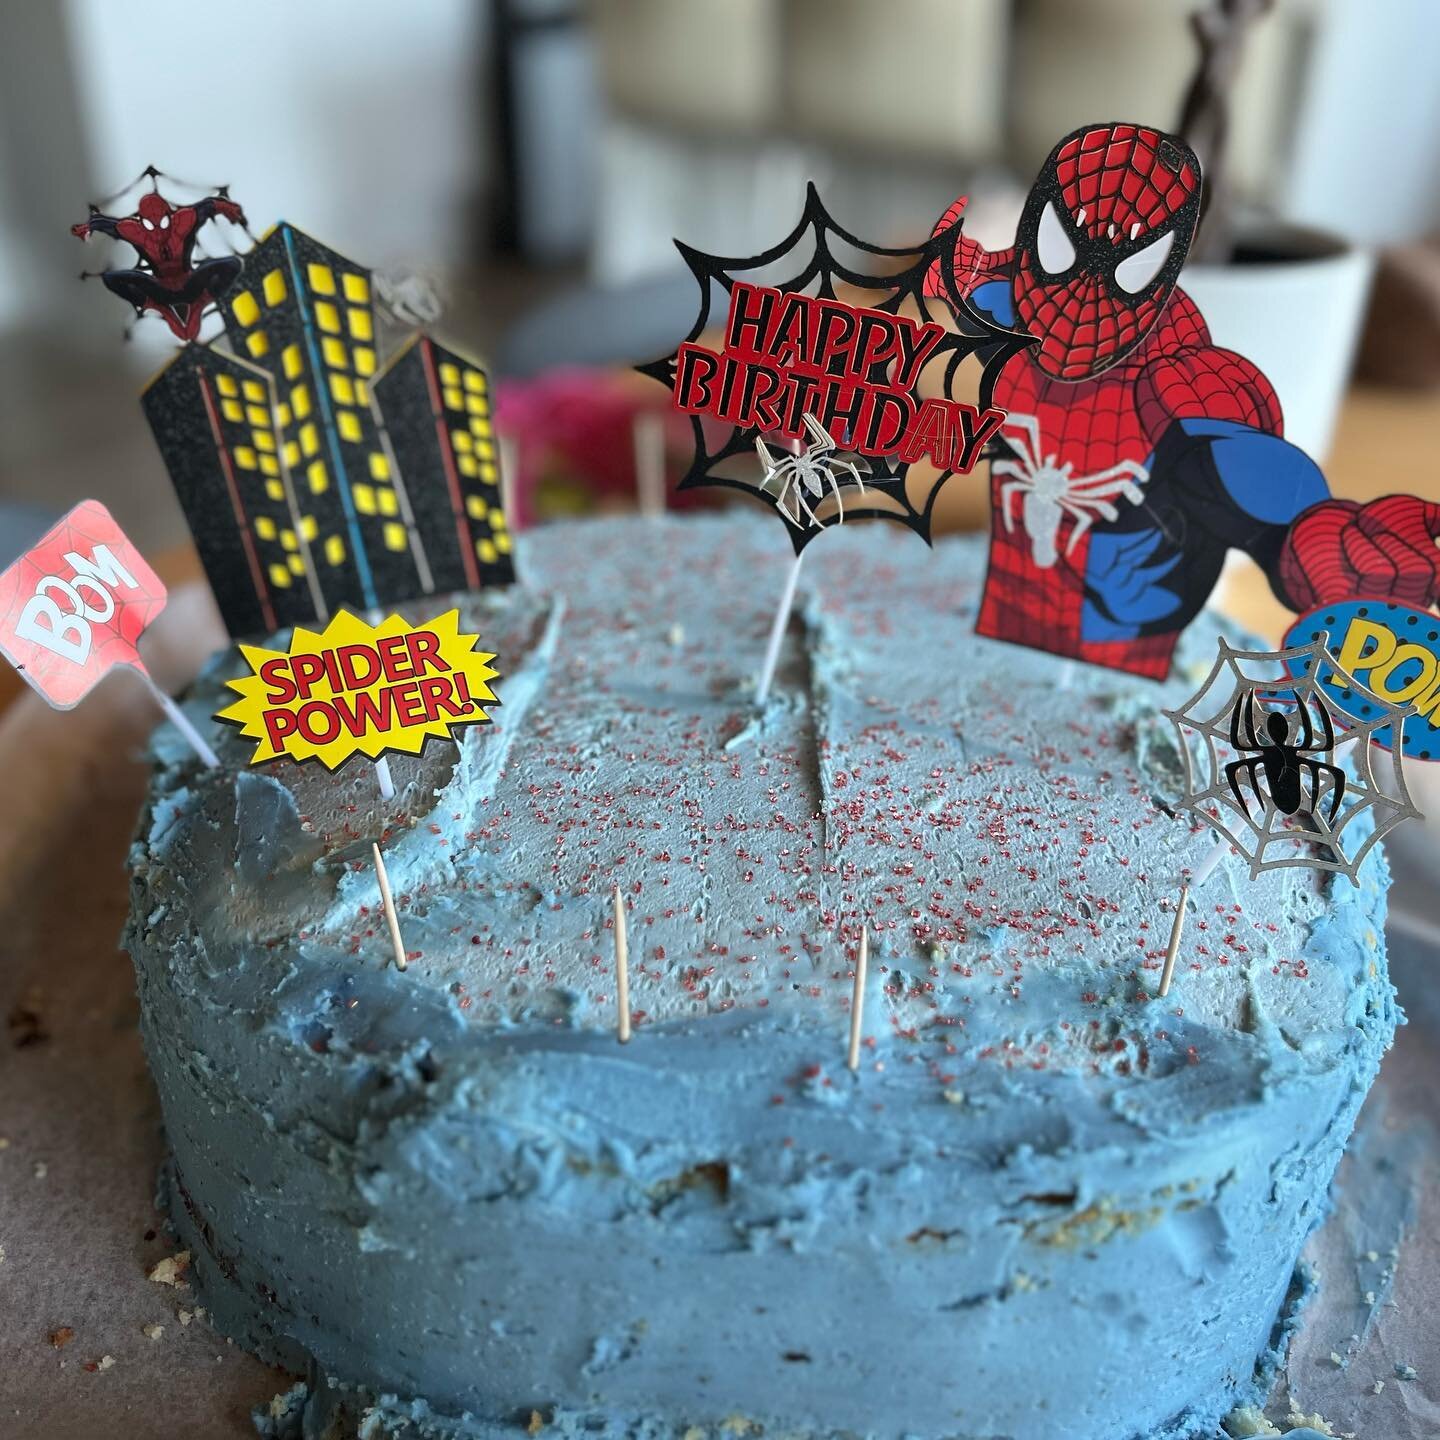 This 18 inch round, 3-layer Spidey cake (filled with chocolate loonies) made one little boy very happy today!! Happiest 6th birthday to our darling boy Clavier! @kenzie_mah2 for baker of the year!